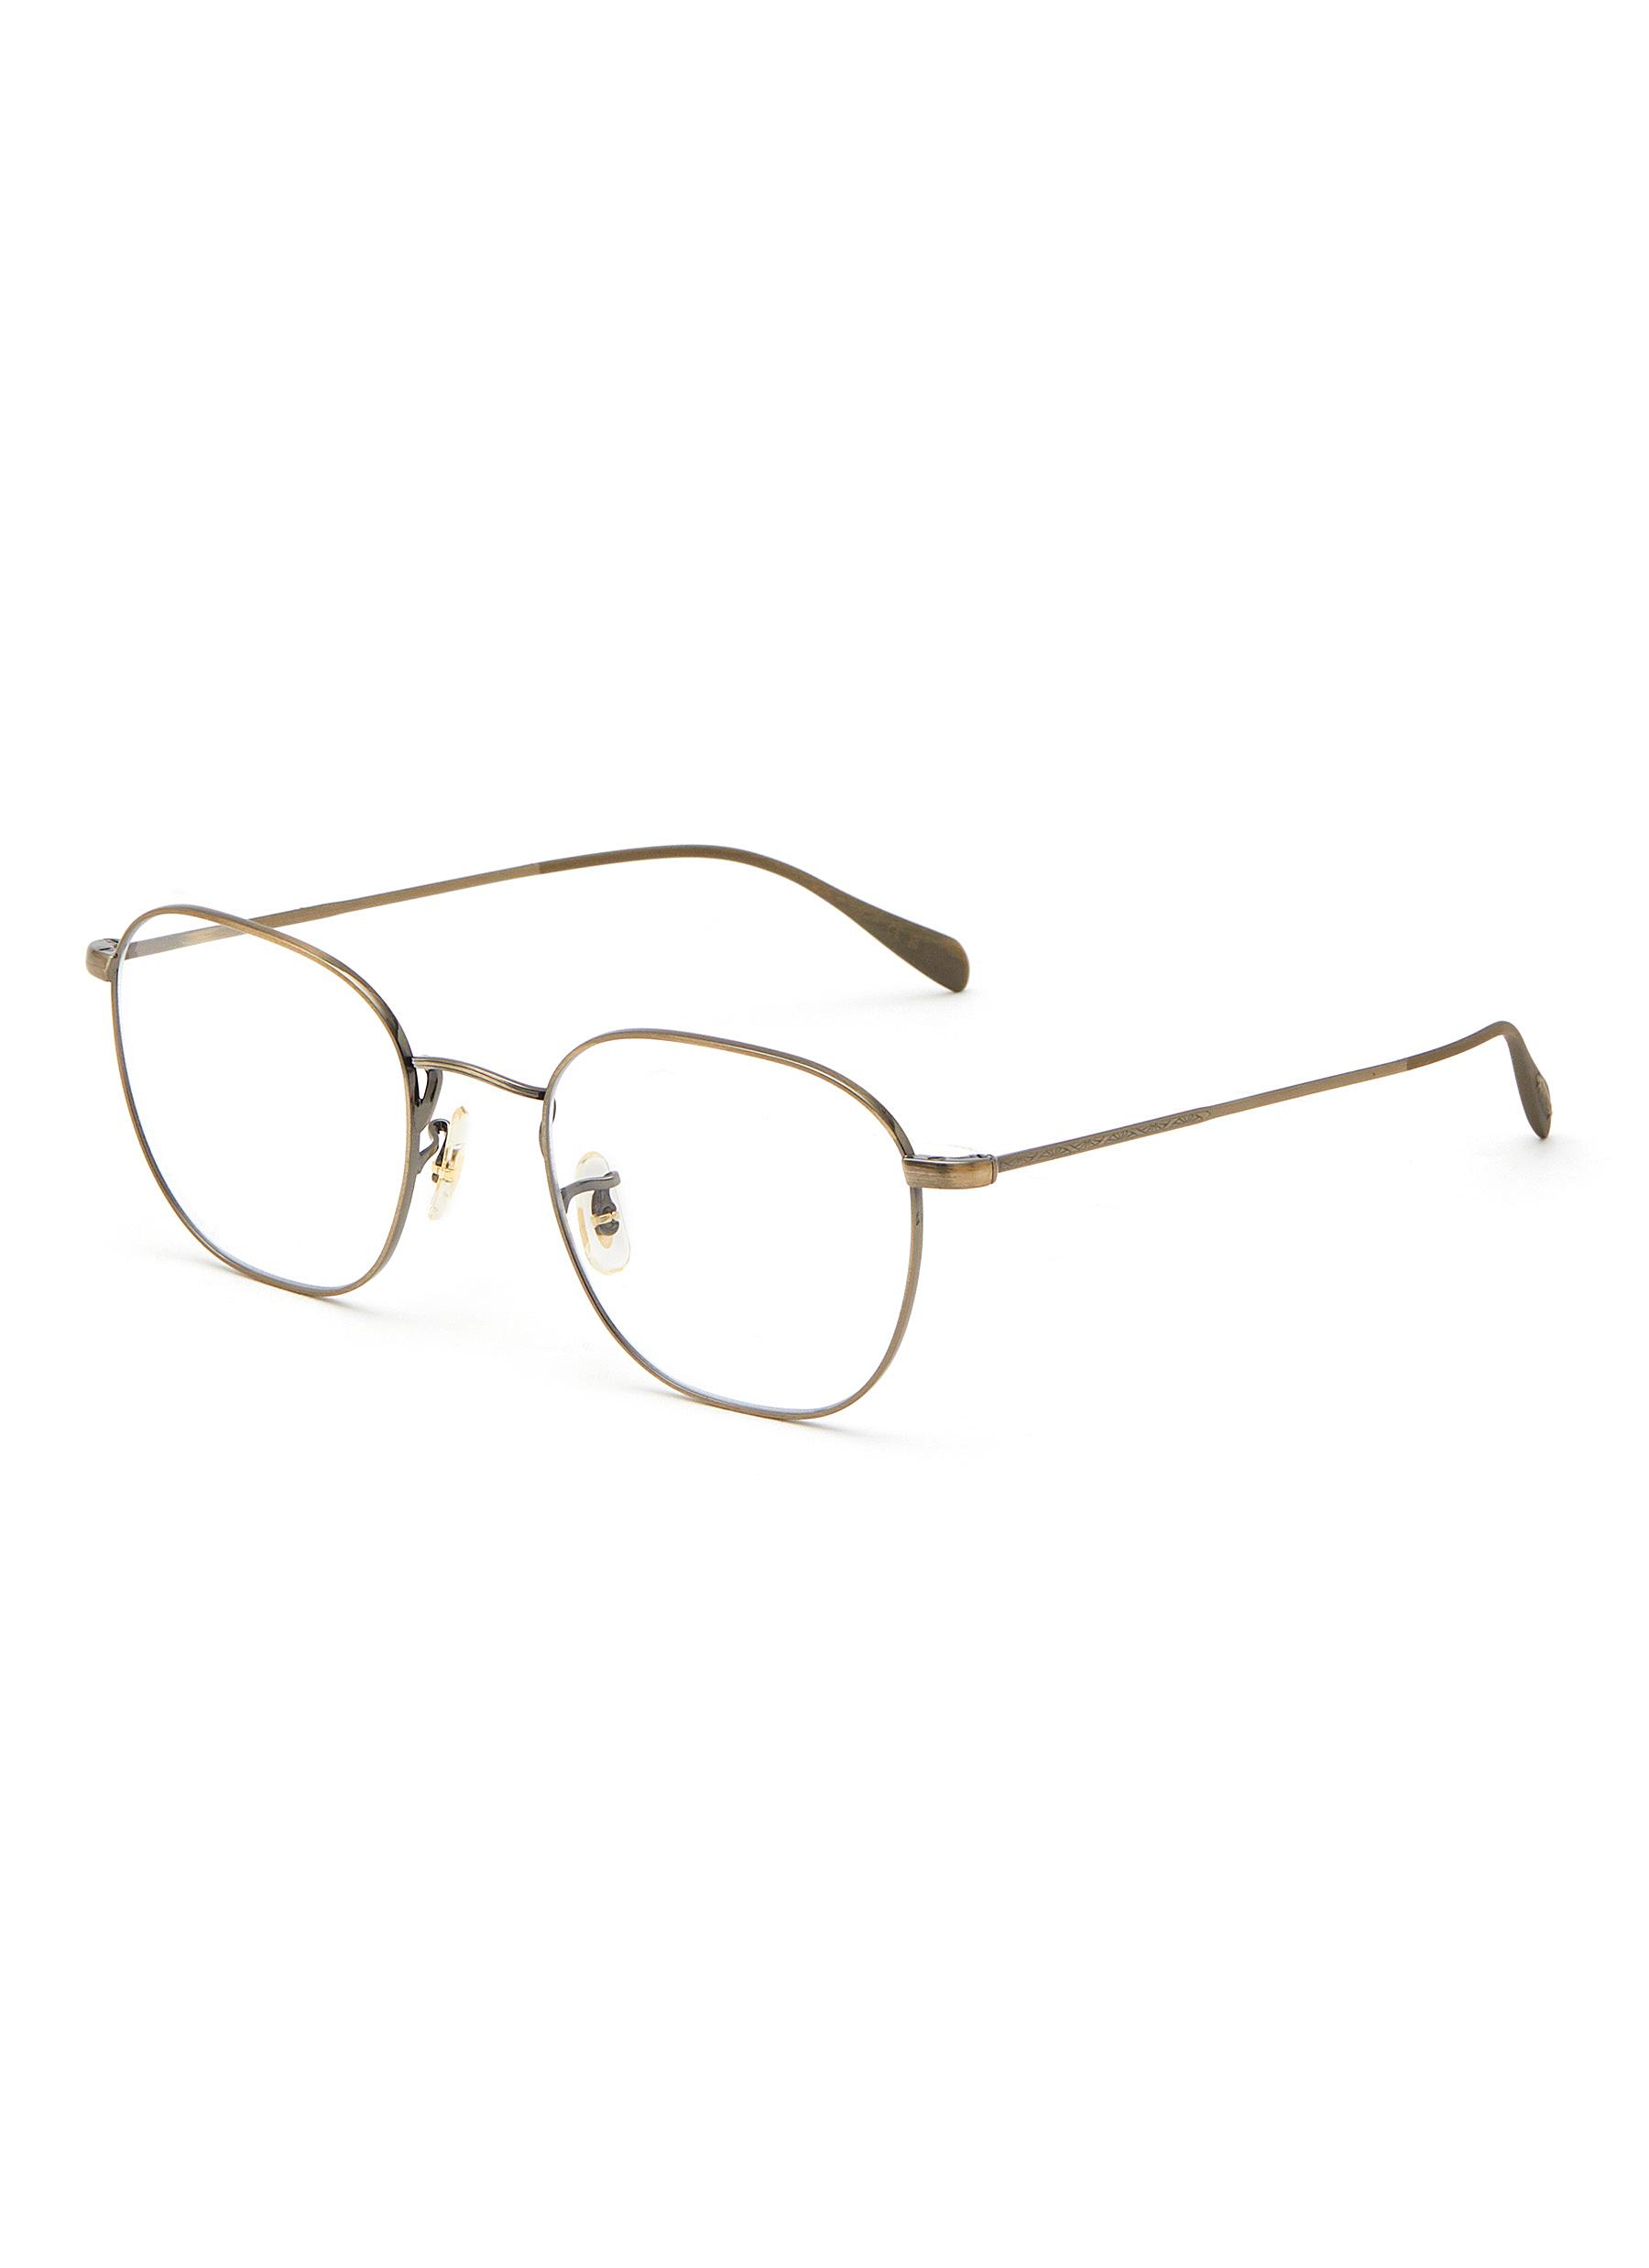 OLIVER PEOPLES ACCESSORIES ‘CLYNE' ROUND METAL FRAME OPTICAL GLASSES